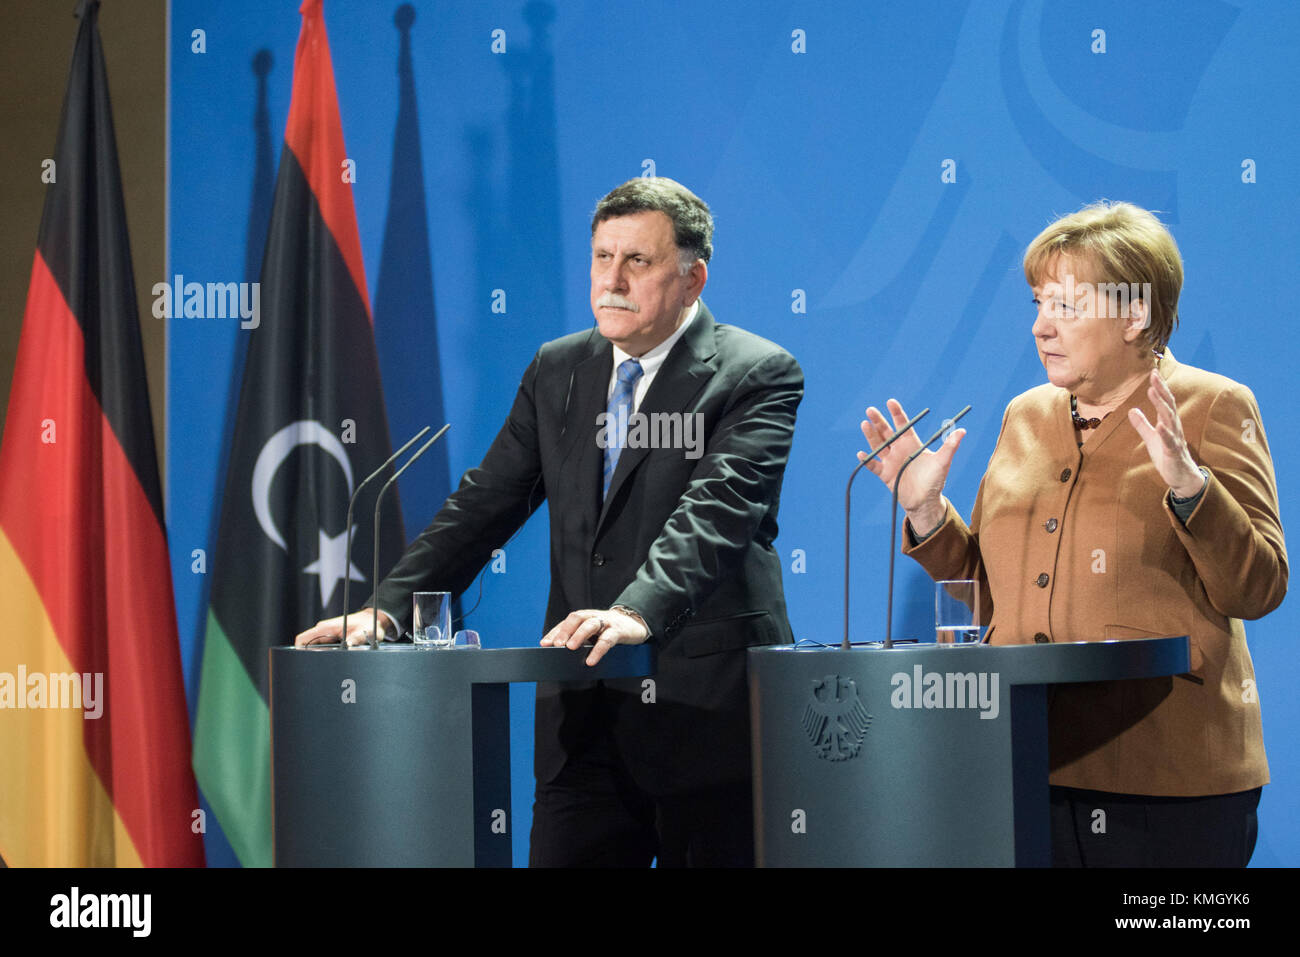 Berlin, Germany. 7th Dec, 2017. German Chancellor Angela Merkel (R) addresses a press conference with visiting Libyan UN-backed Prime Minister Fayez al-Sarraj in Berlin, Germany, on Dec. 7, 2017. Merkel, after talks with Fayez al-Sarraj on Thursday, urged the Libyan authorities to improve the conditions of migrants in the North African country and pledged more support from the European Union. Credit: Zhang Yuan/Xinhua/Alamy Live News Stock Photo